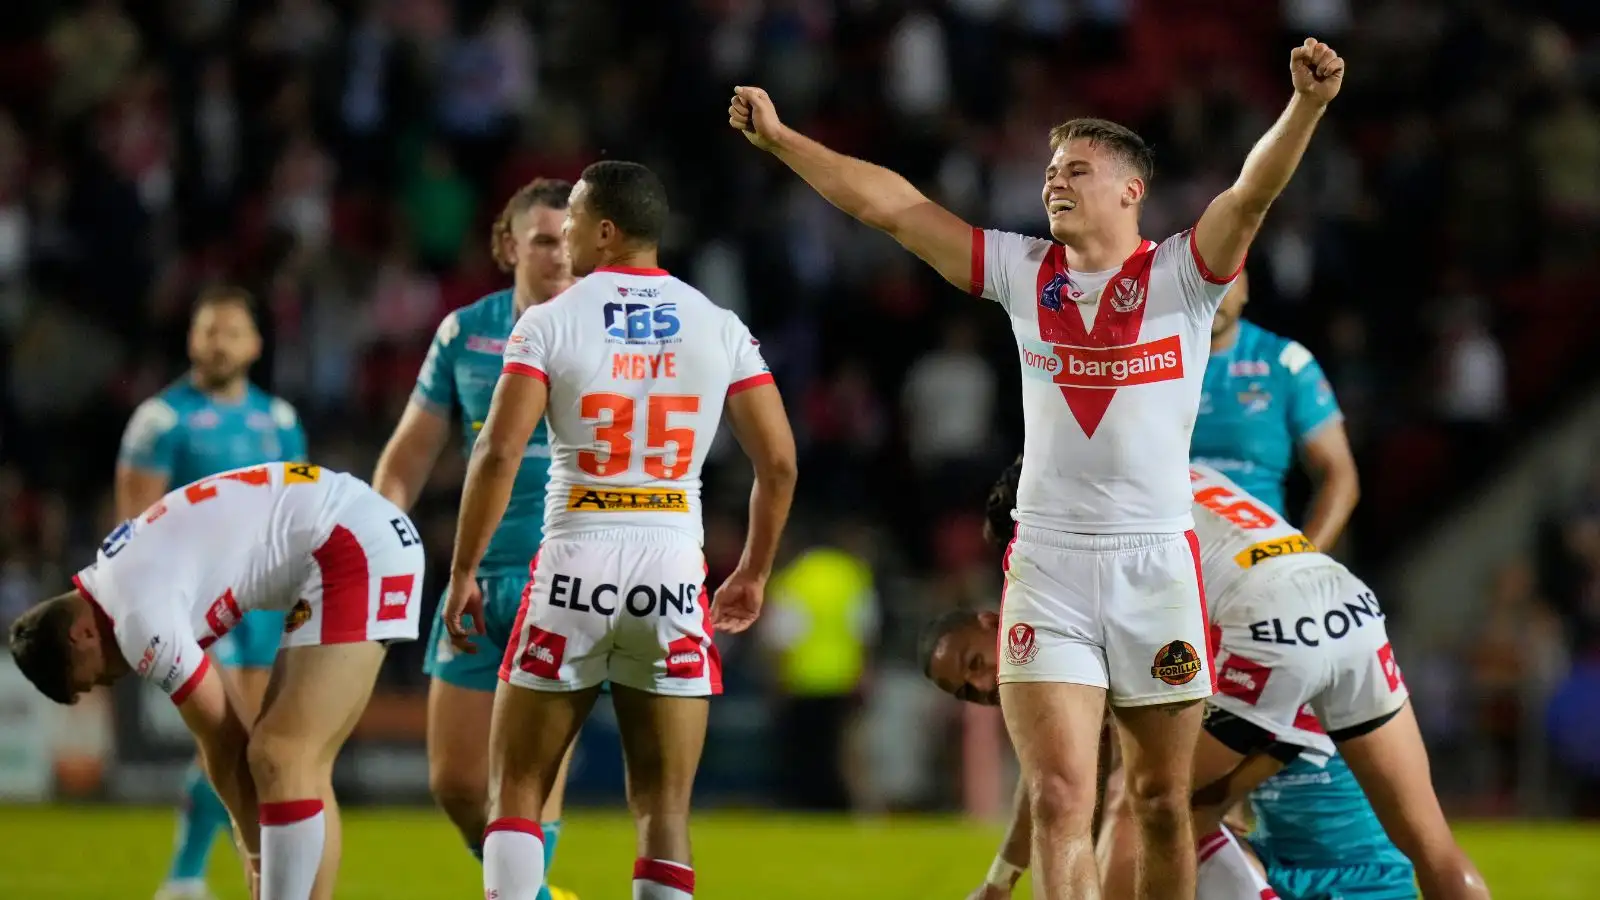 Phil Clarke beams over Super League’s best player: ‘He’s head and shoulders above everybody else for me’